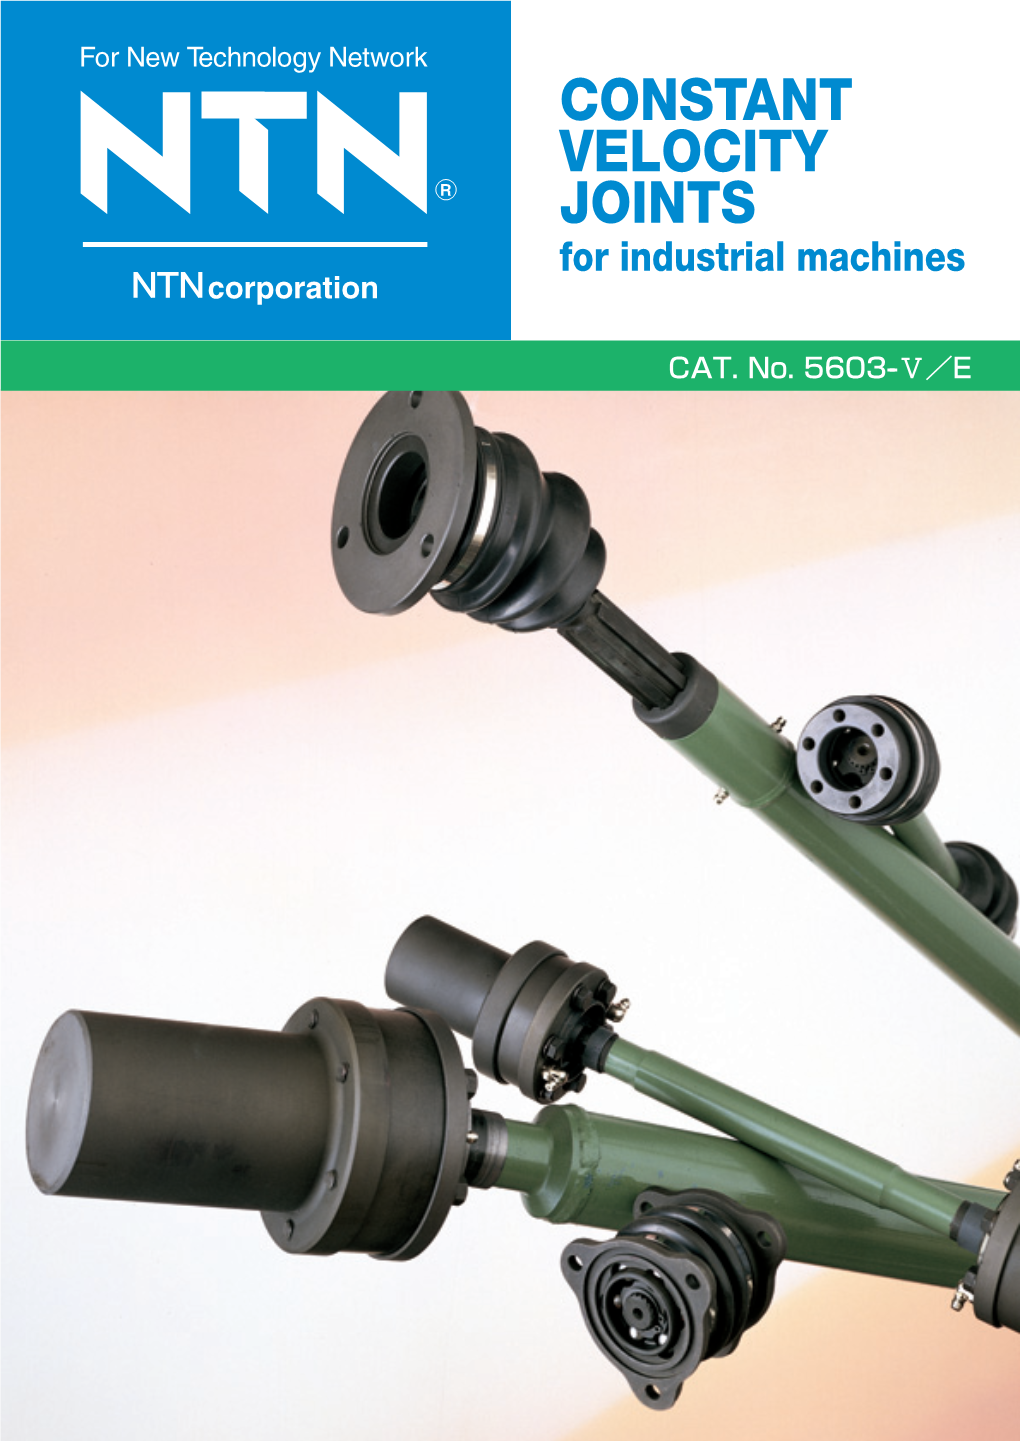 CONSTANT VELOCITY JOINTS for Industrial Machines